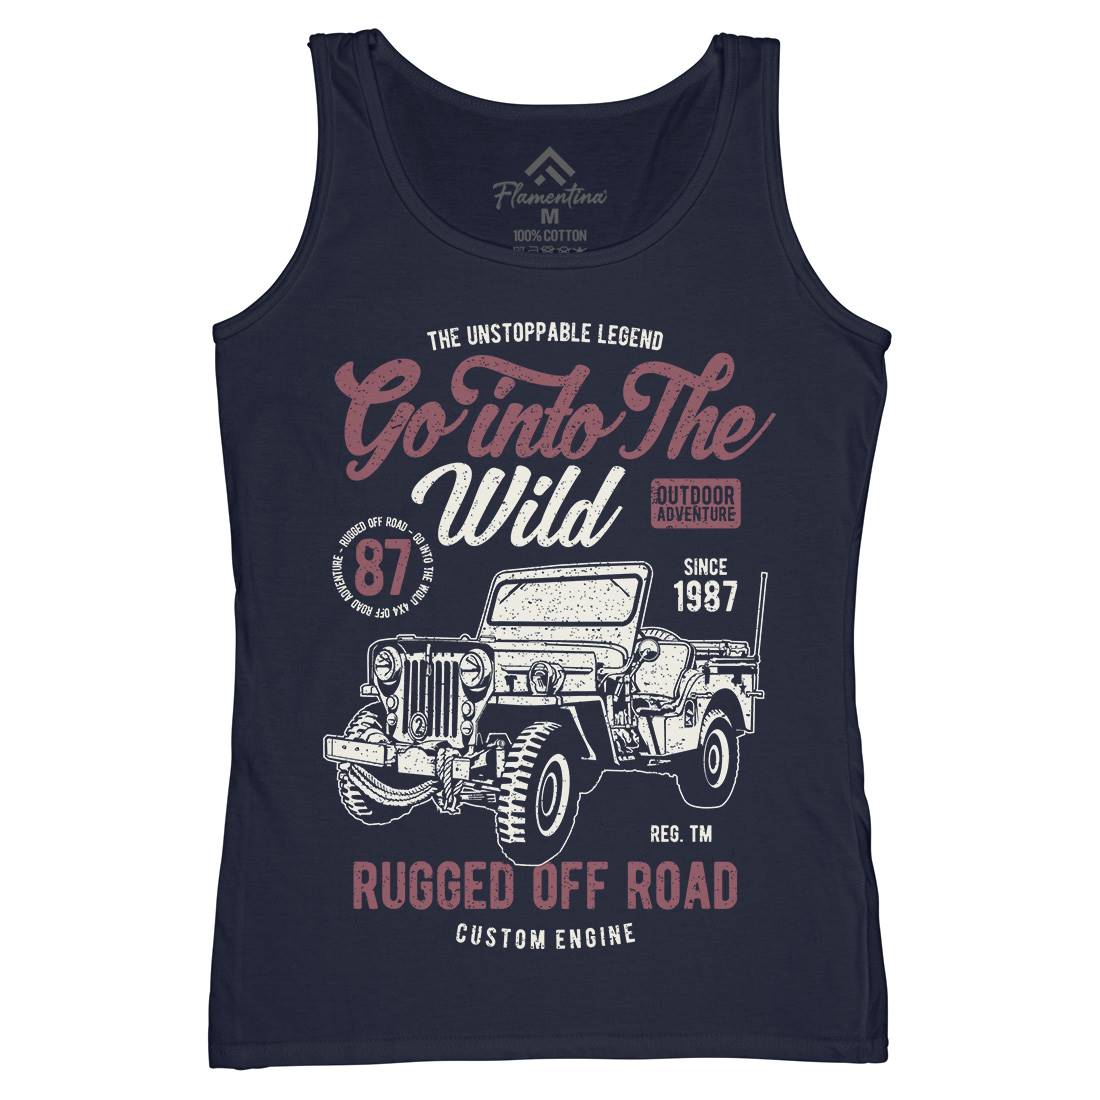 Go Into The Wild Womens Organic Tank Top Vest Vehicles A674